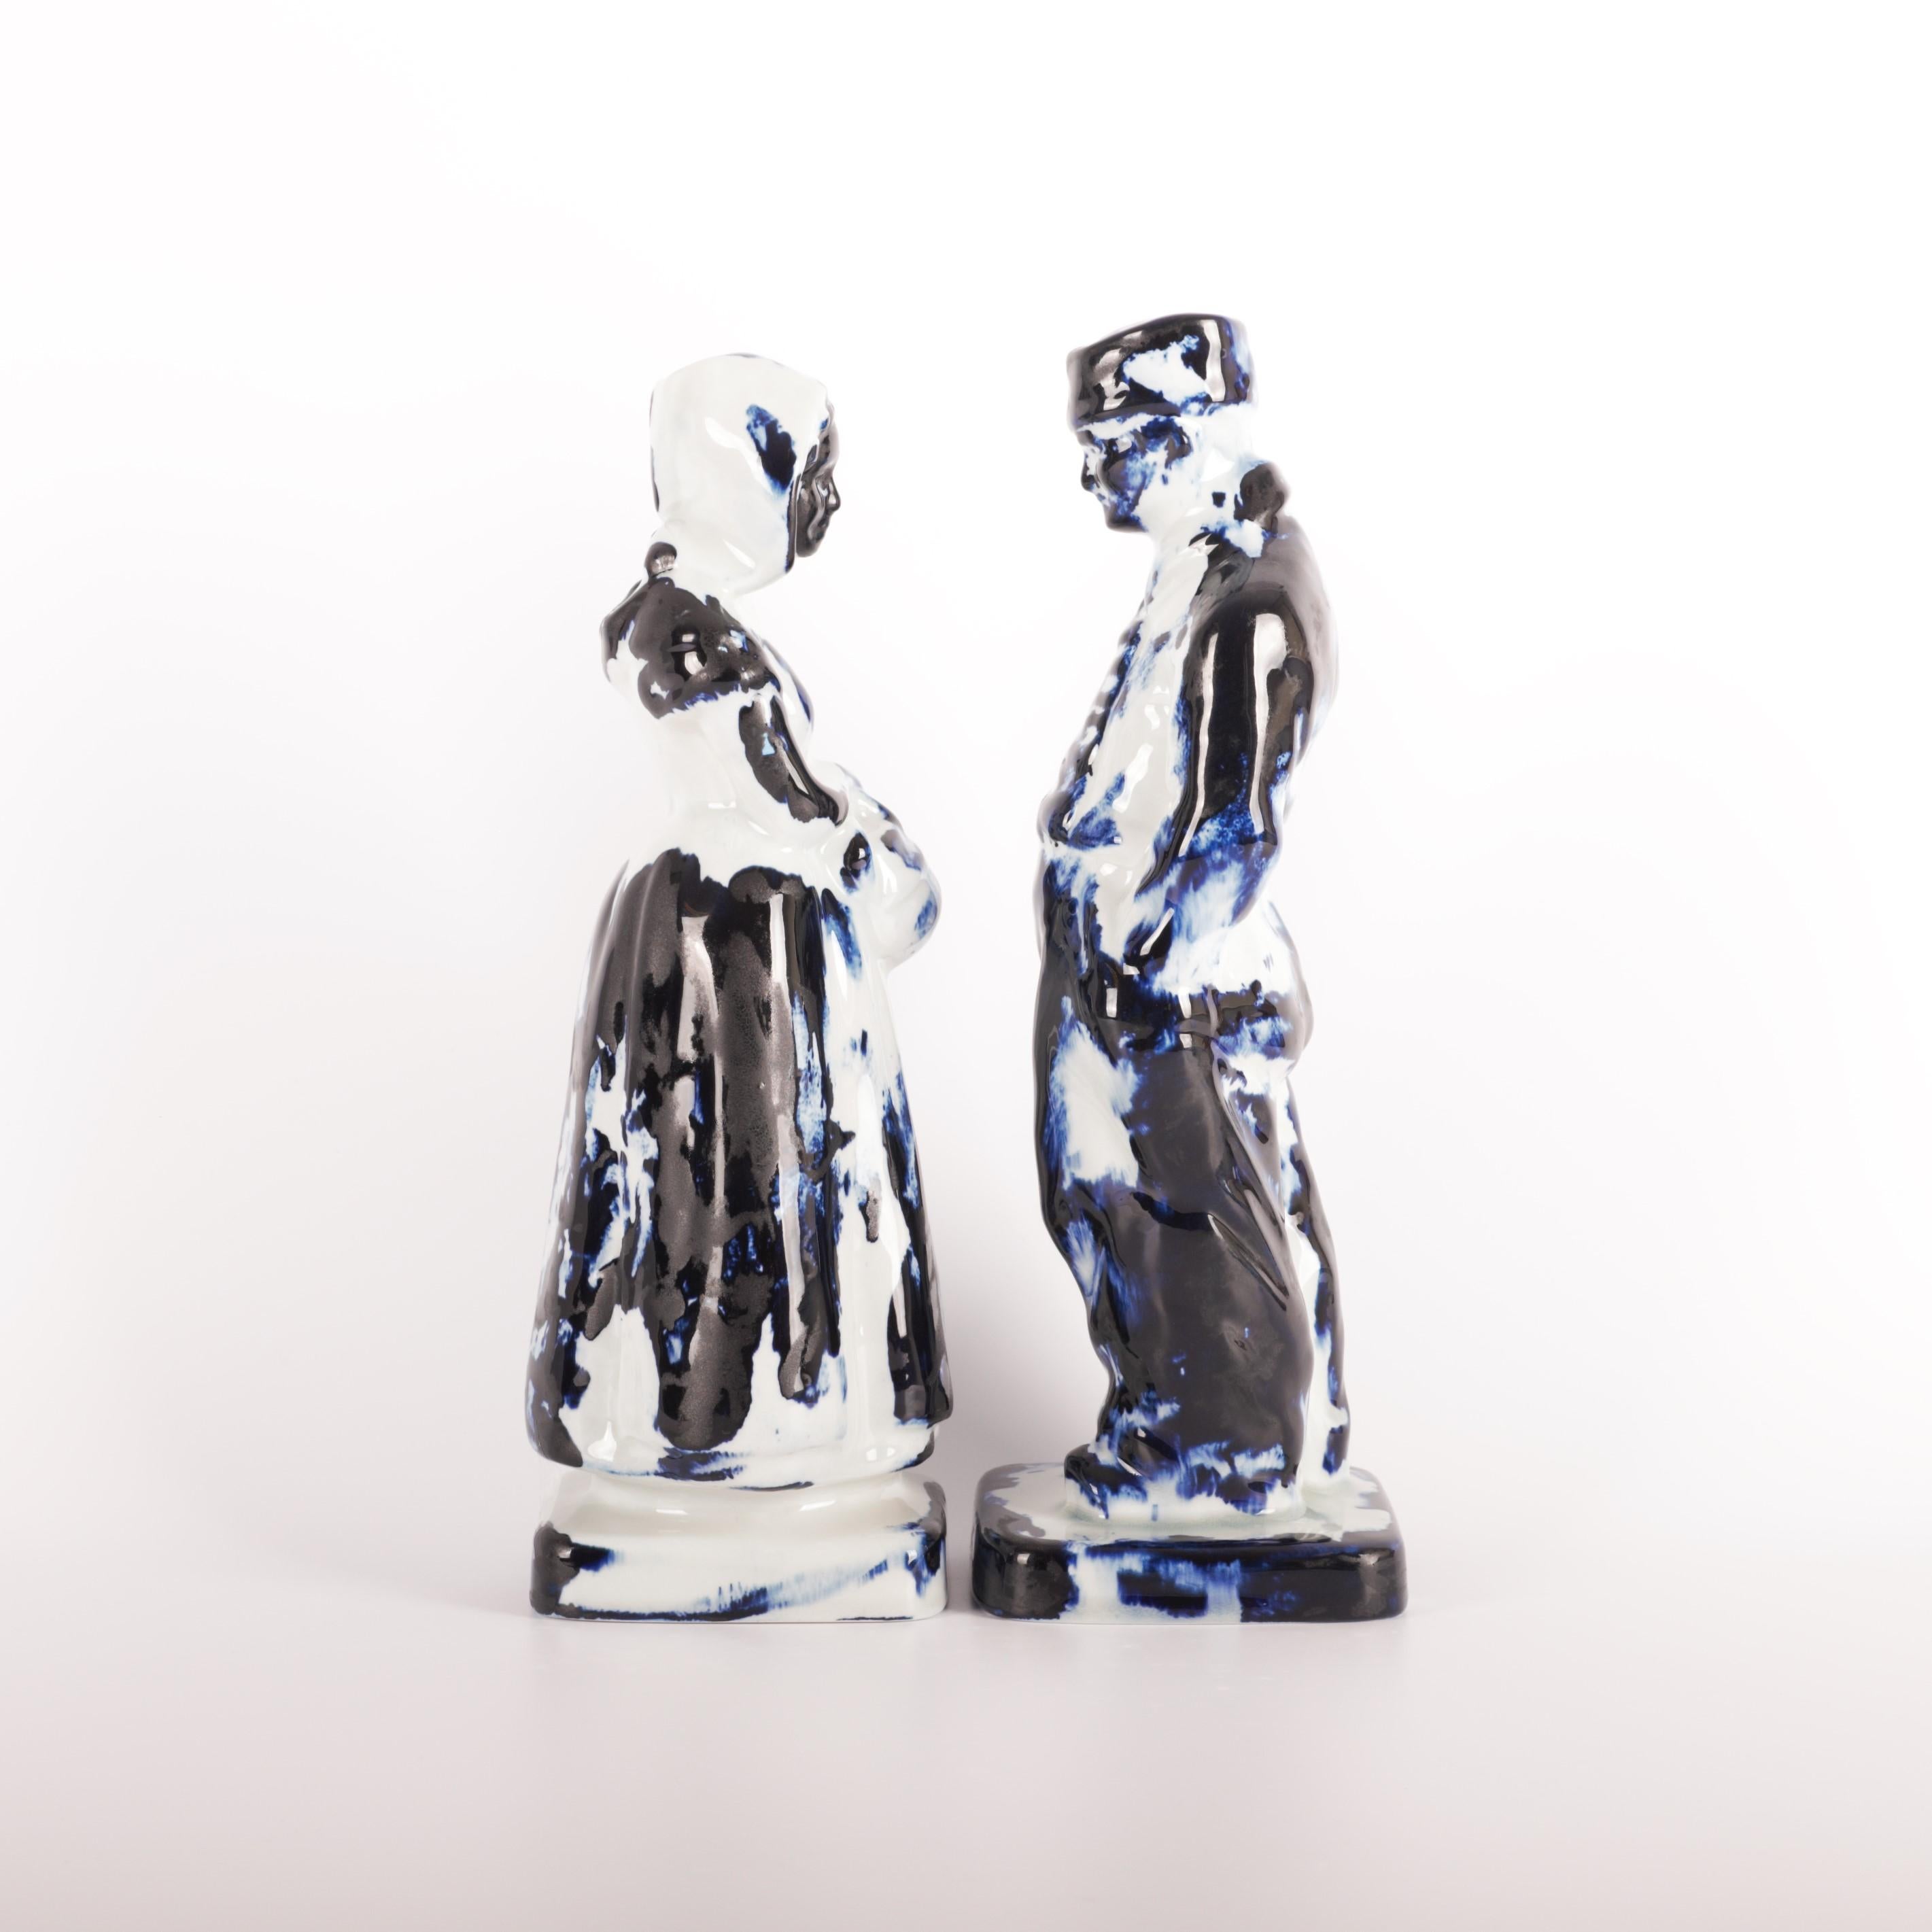 The set of One Minute Delft Blue Farmer & Farmer Wife is available as an exclusive Personal Edition, Marcel Wanders' label carrying works of a more personal and experimental nature. The pieces of the Delft Blue series are unlimited unique by